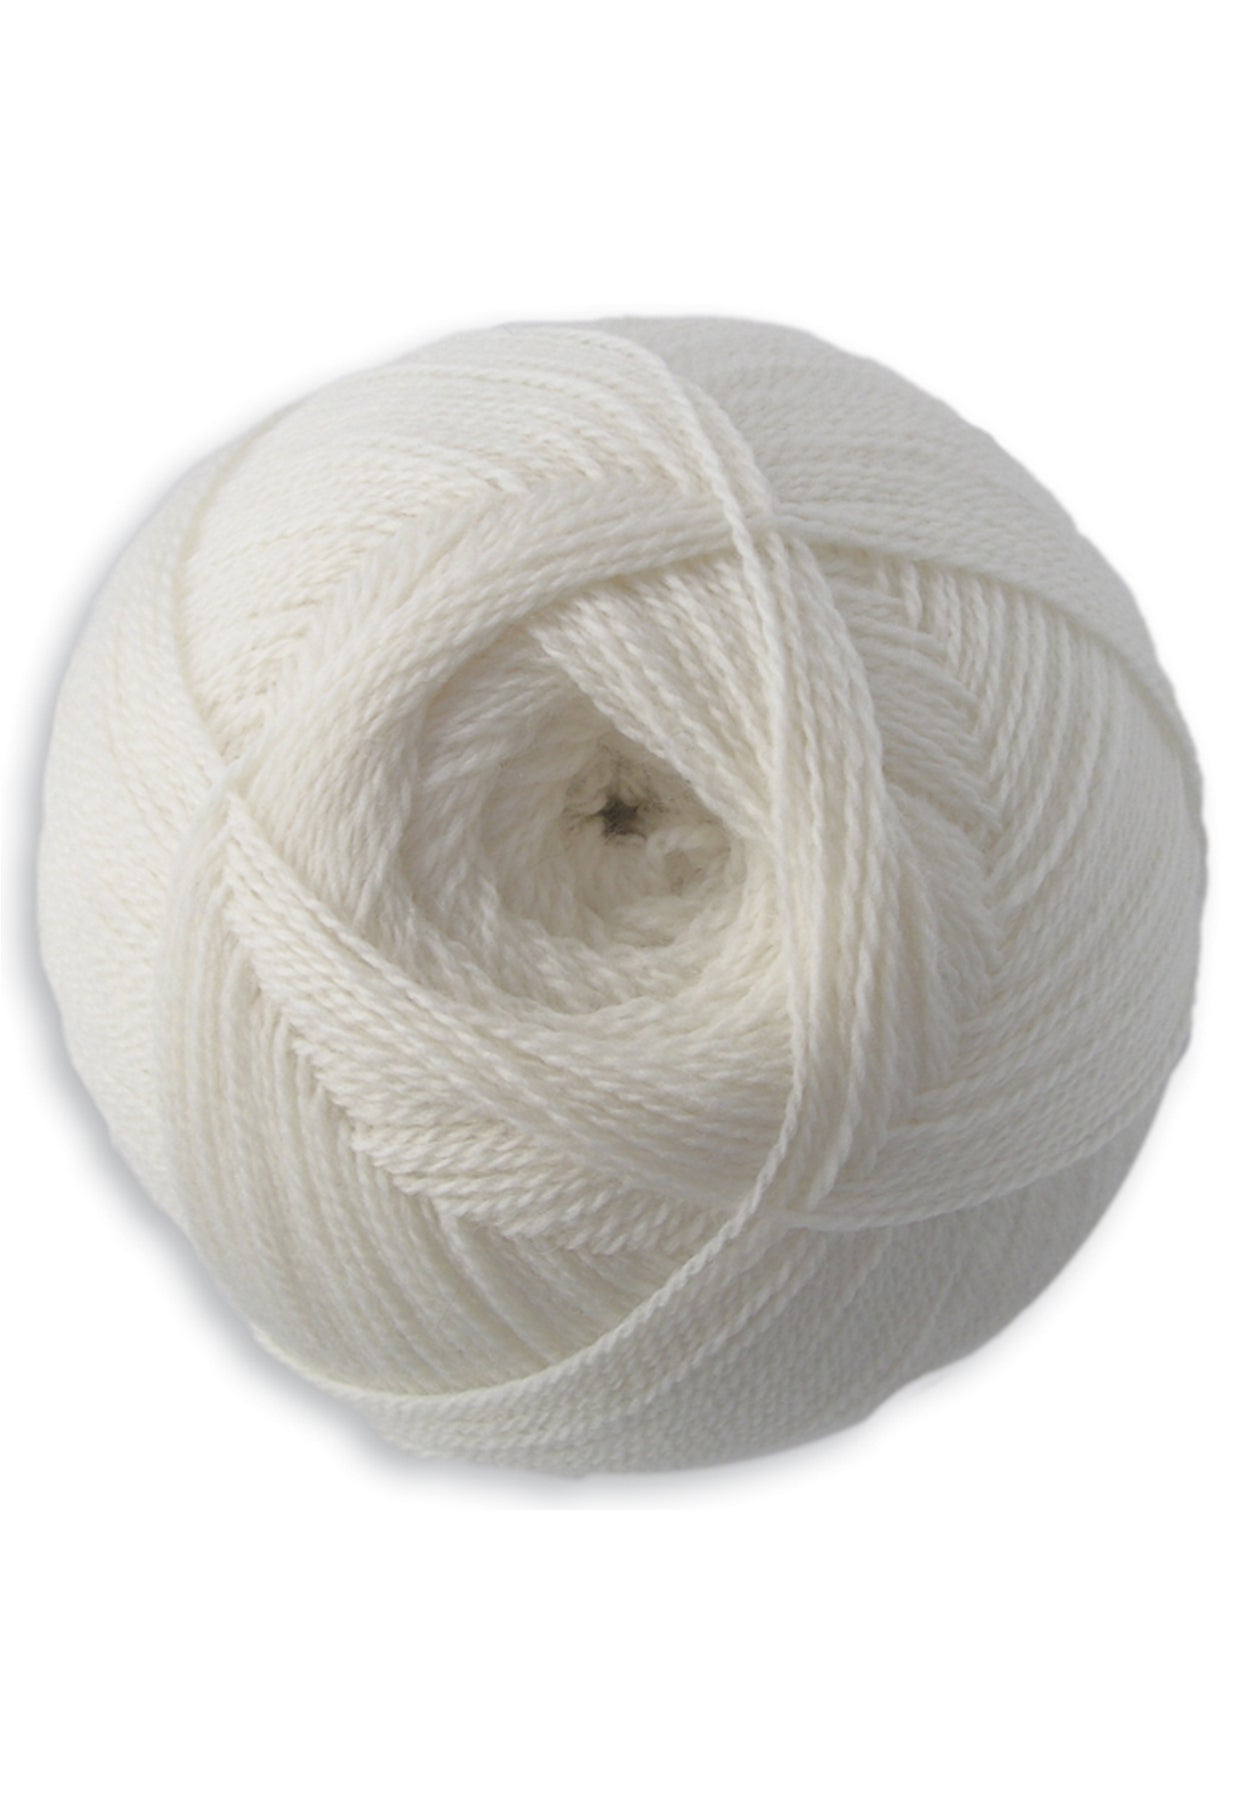 White 2 ply White Knitting Yarns The Wool Company